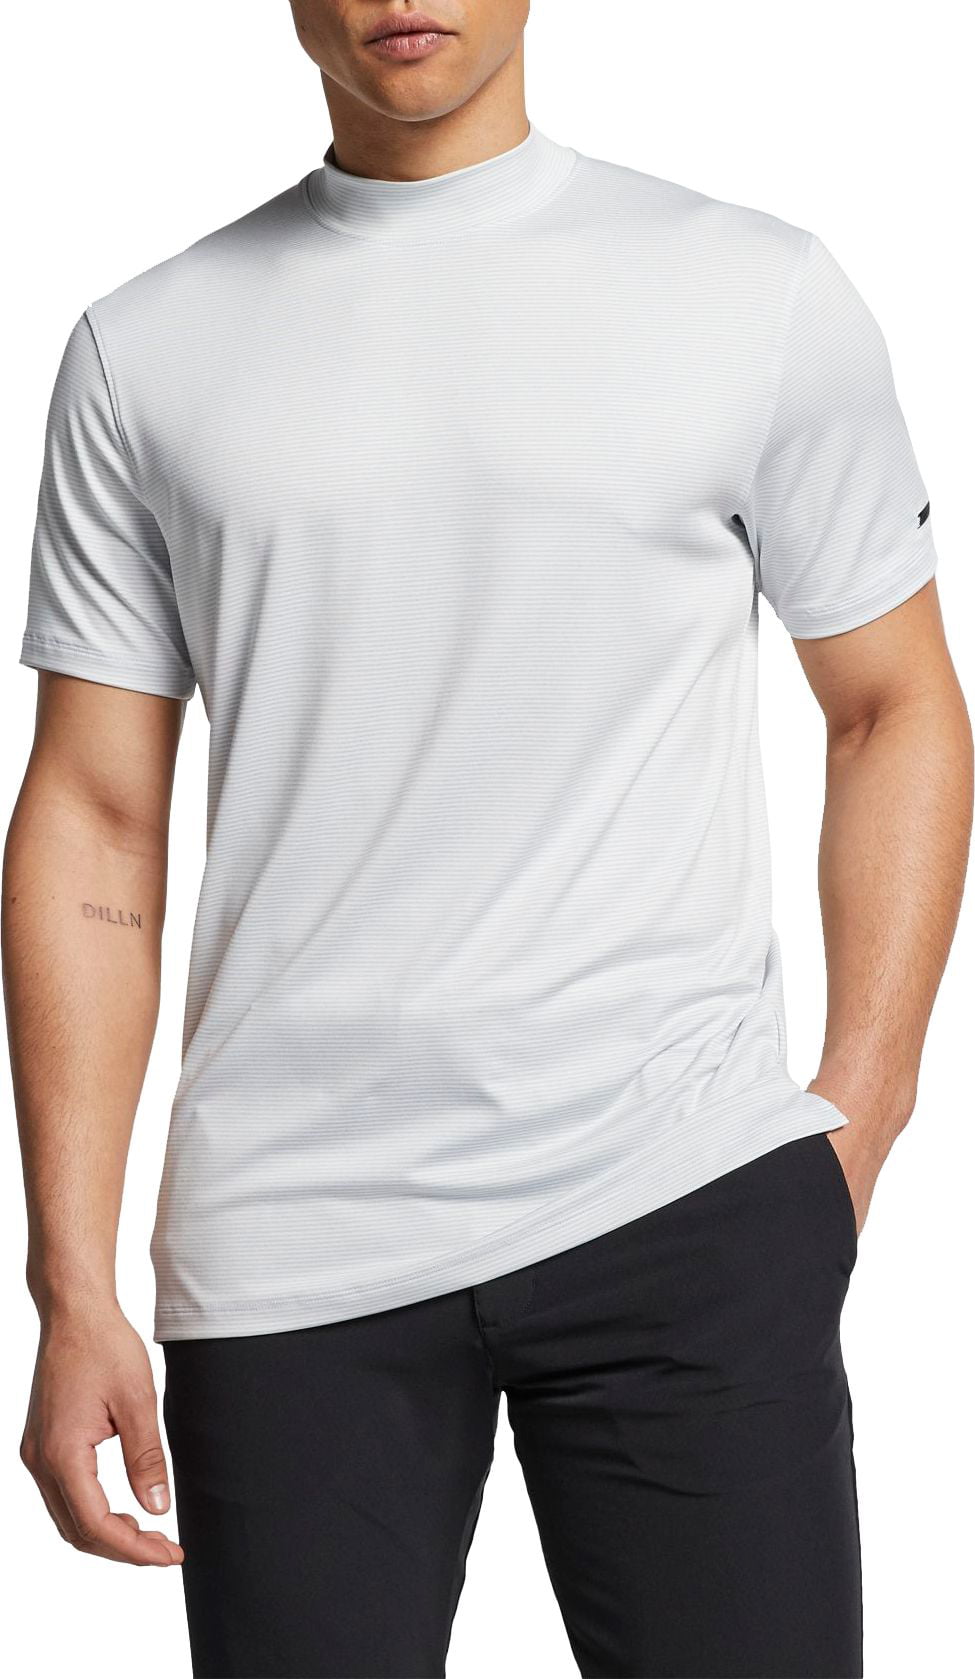 tiger woods mock neck polo